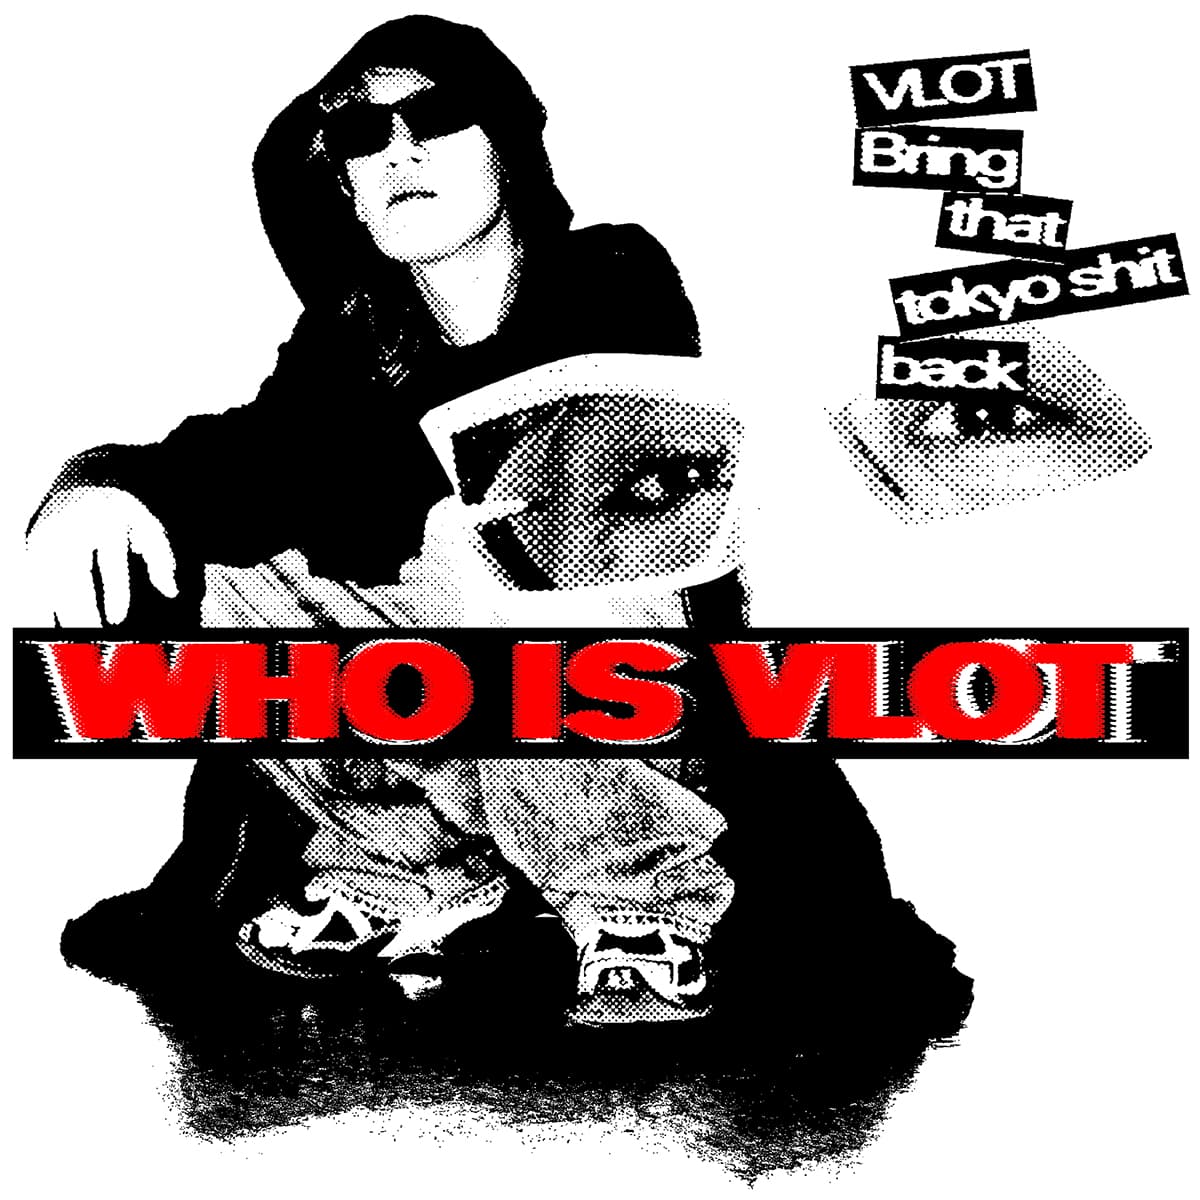 VLOT “WHO IS VLOT (Complete Edition)” released